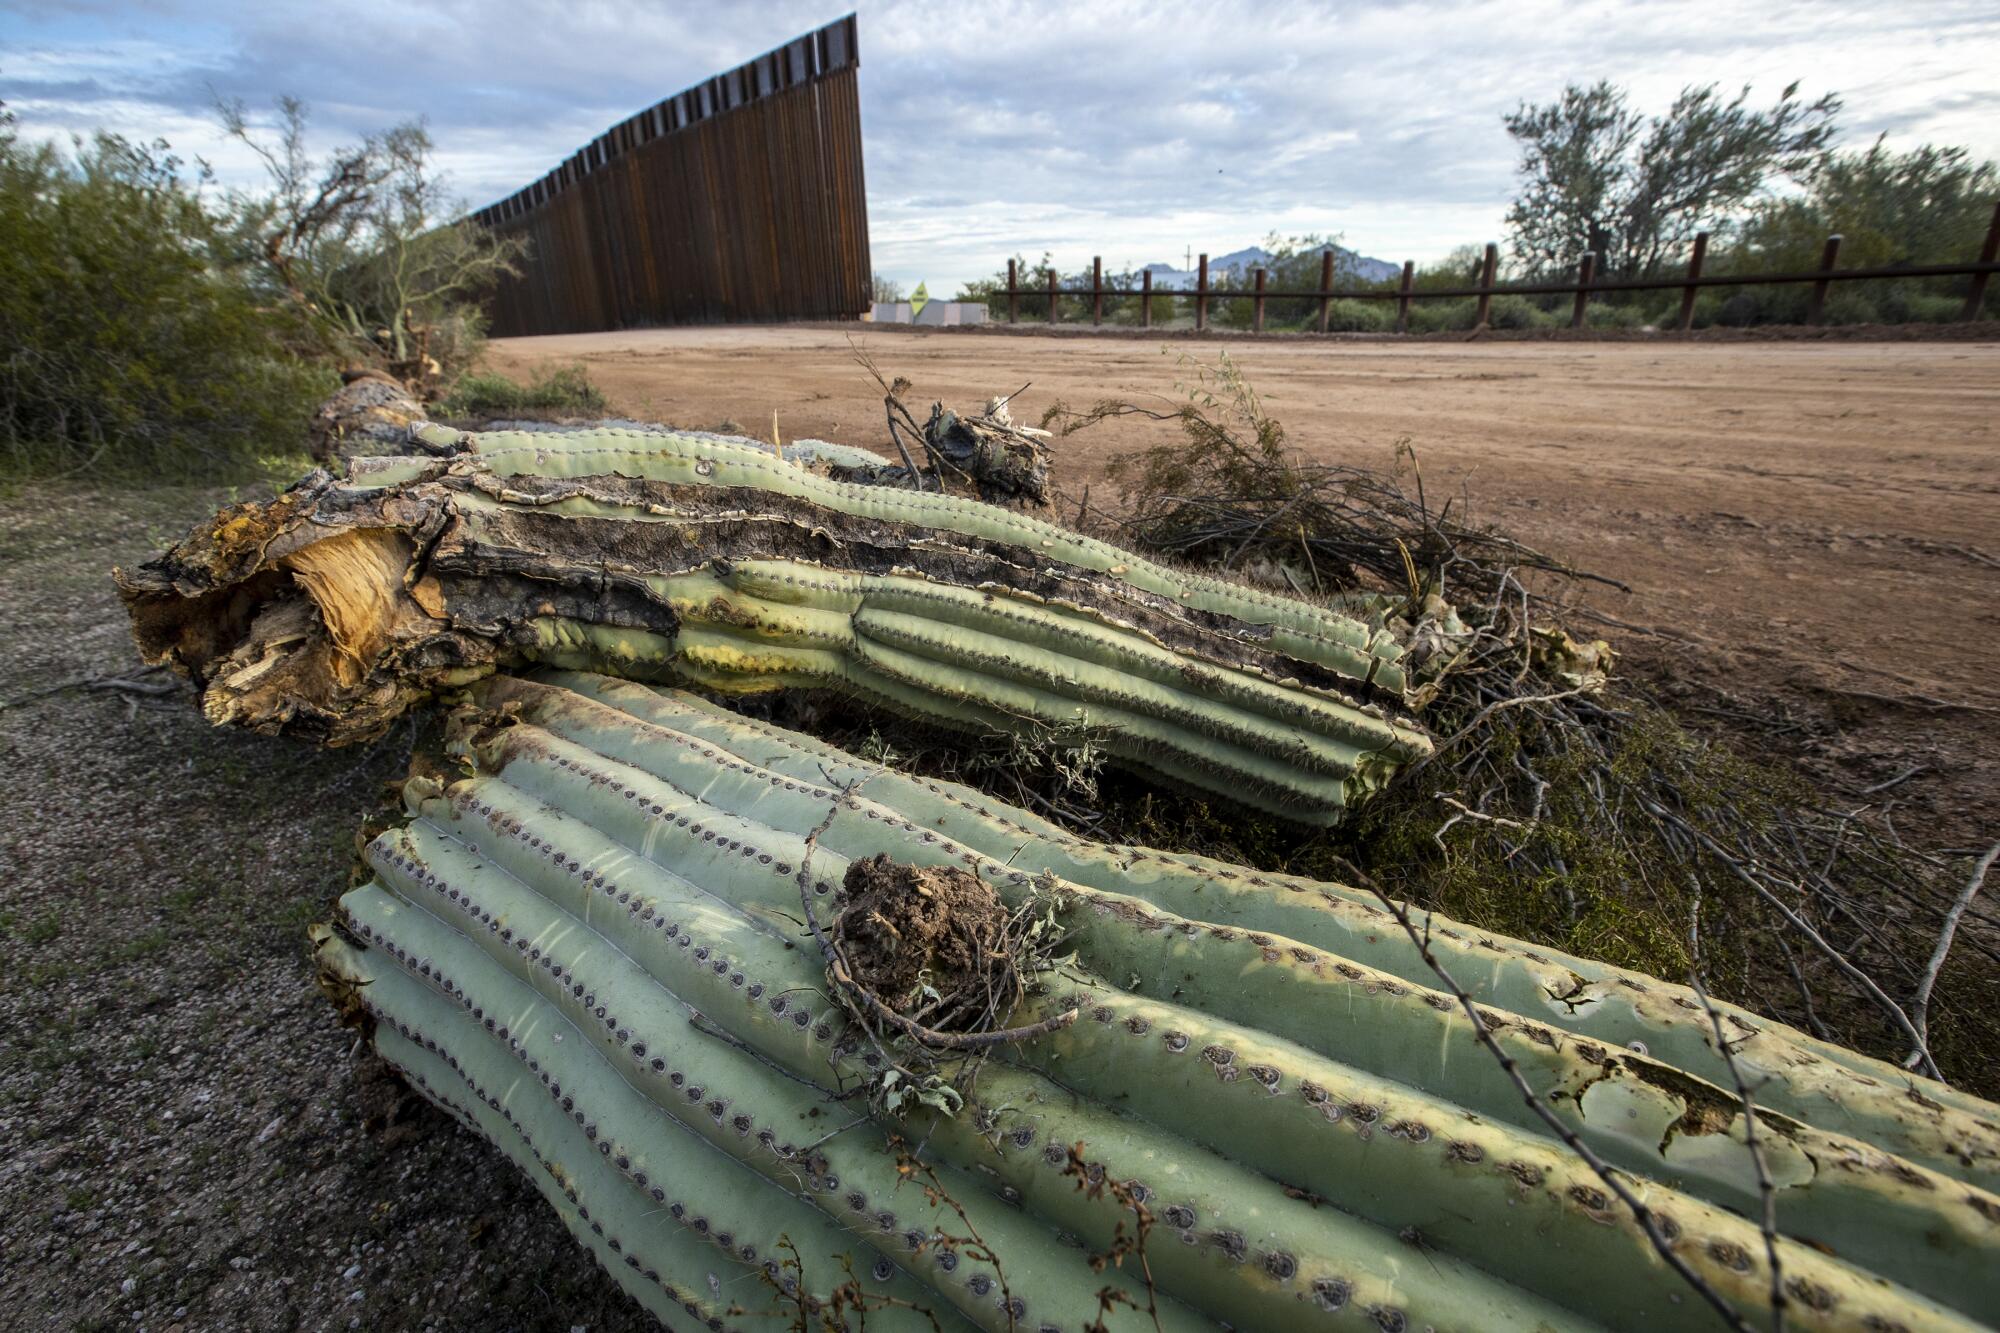 A saguaro cactus lies on the ground after having been uprooted the day before by construction crews making way for new border wall on Puerto Blanco Drive in Organ Pipe Cactus National Monument in Arizona.